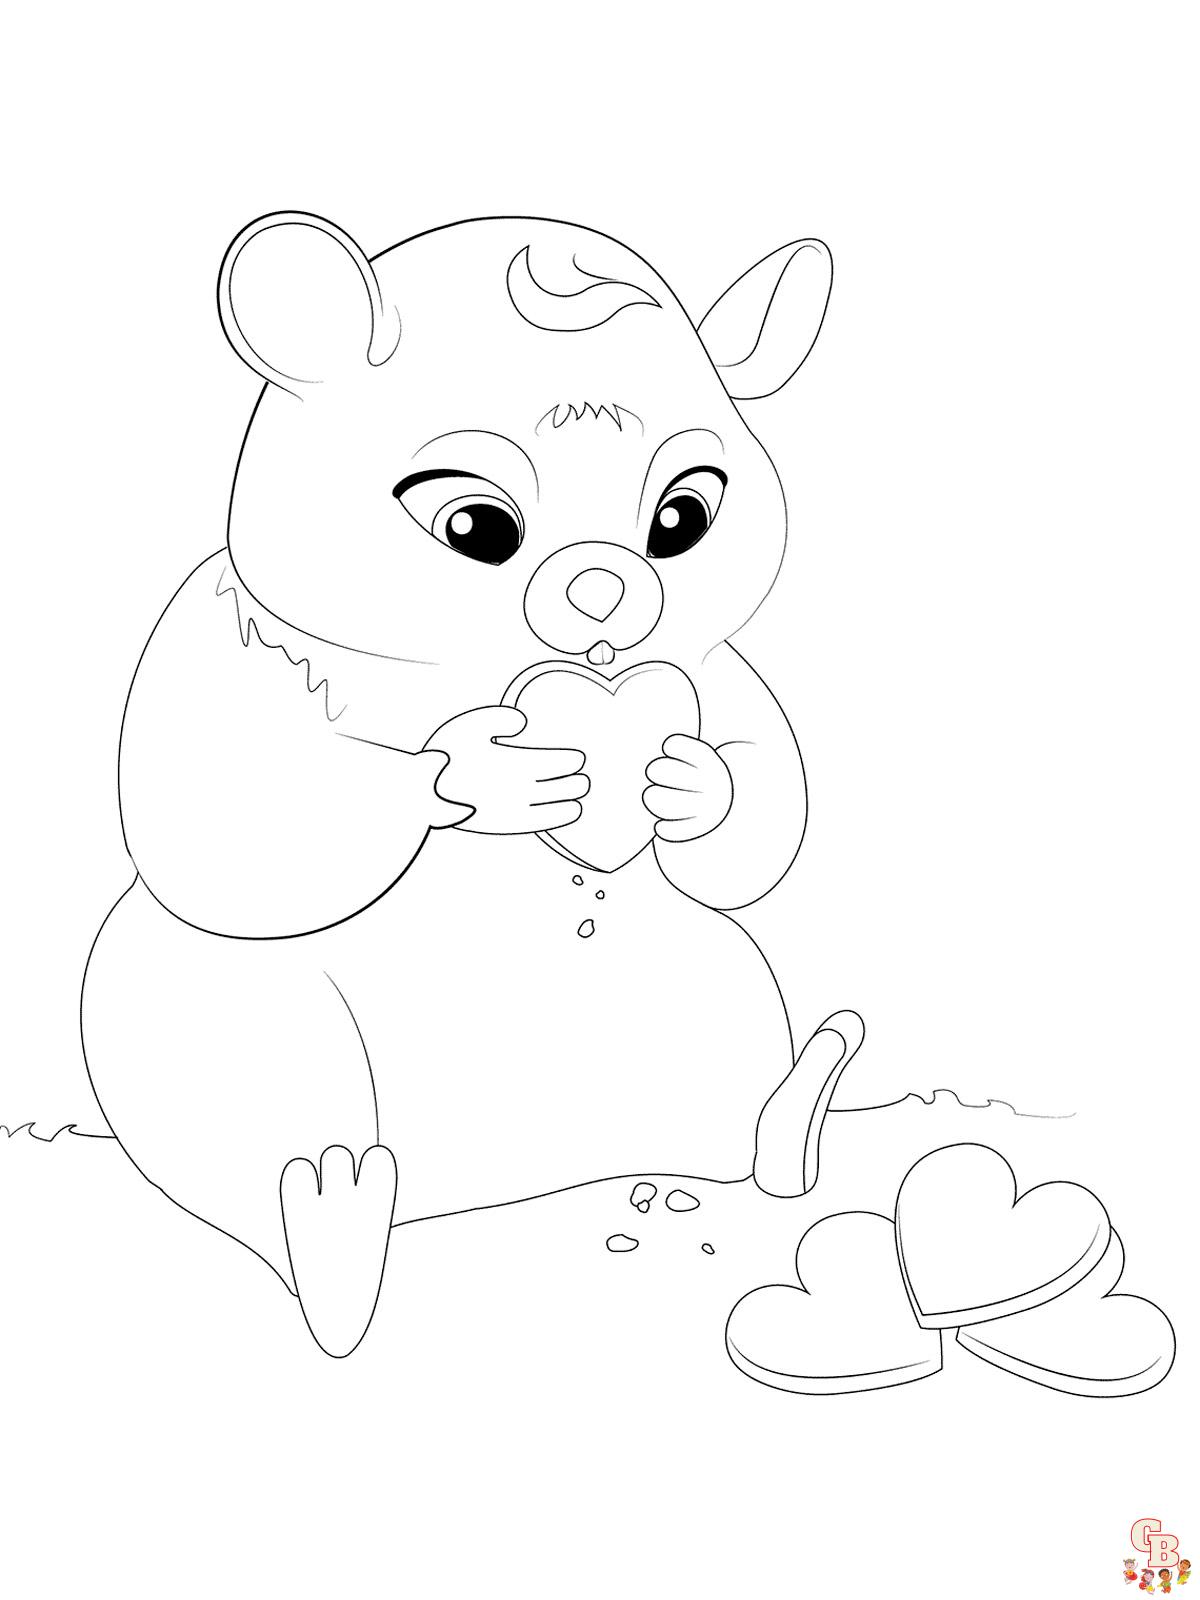 CoComelon Coloring Pages - ColoringAll